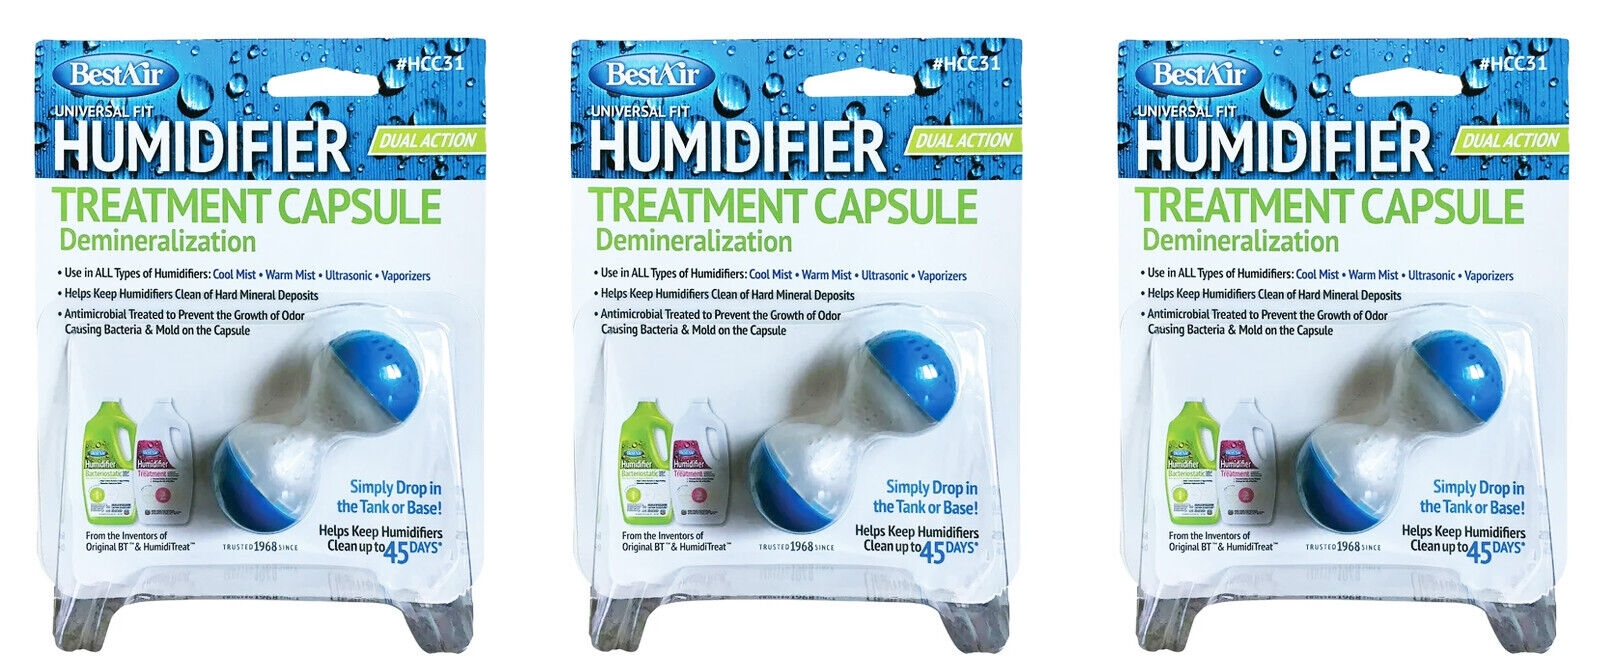 BestAir Humidifier Treatment Capsule (HCC31) Dual Action - 3 NEW SEALED